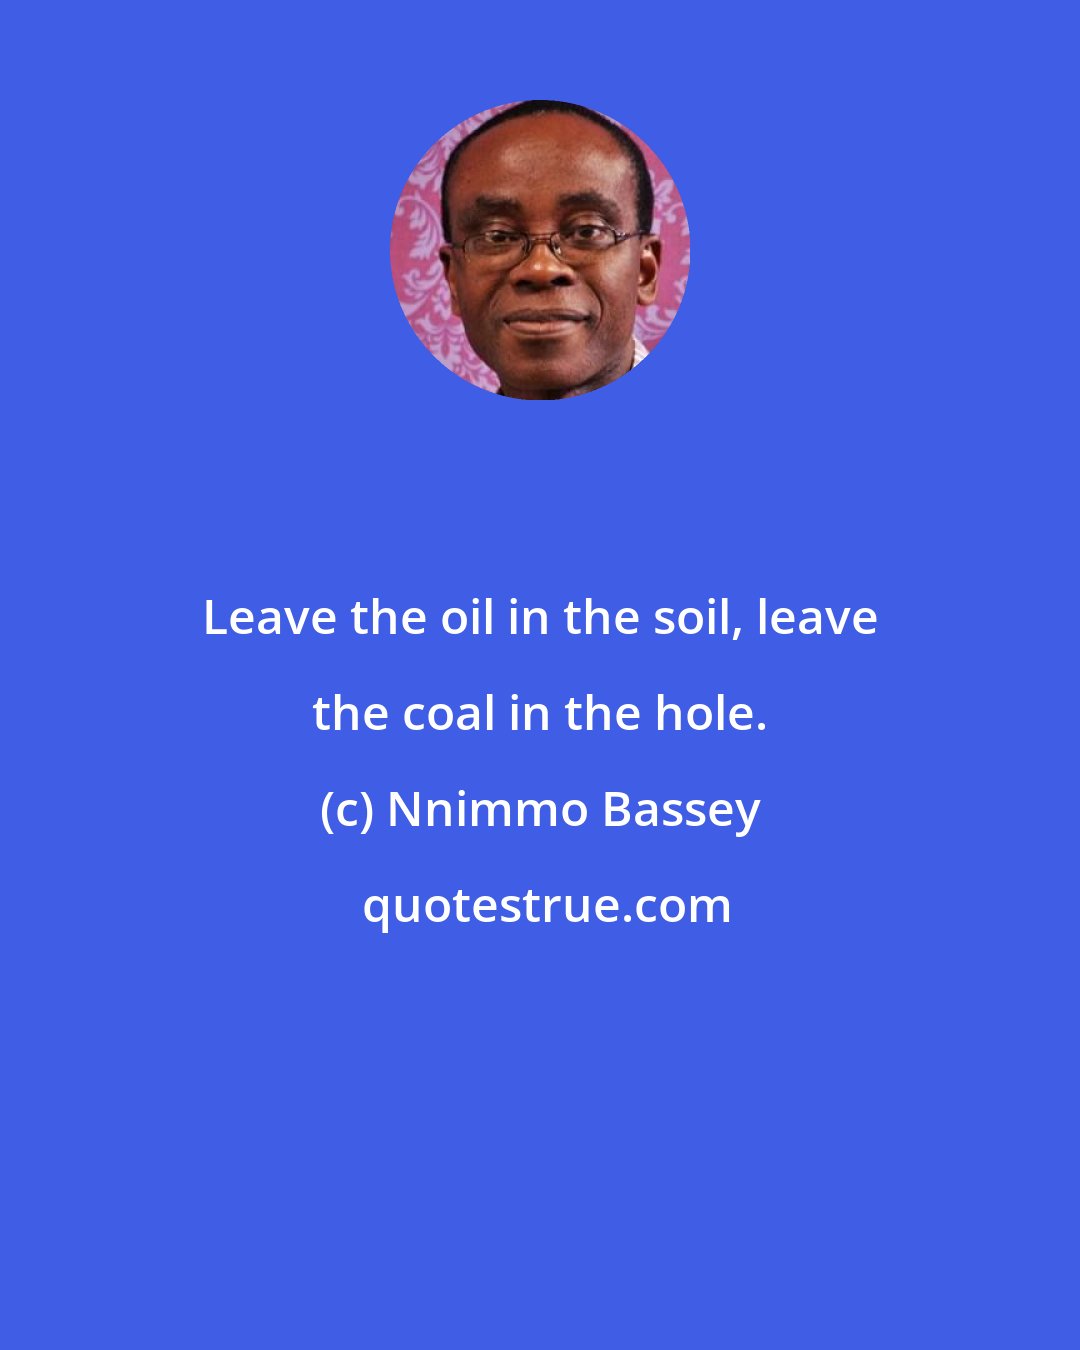 Nnimmo Bassey: Leave the oil in the soil, leave the coal in the hole.